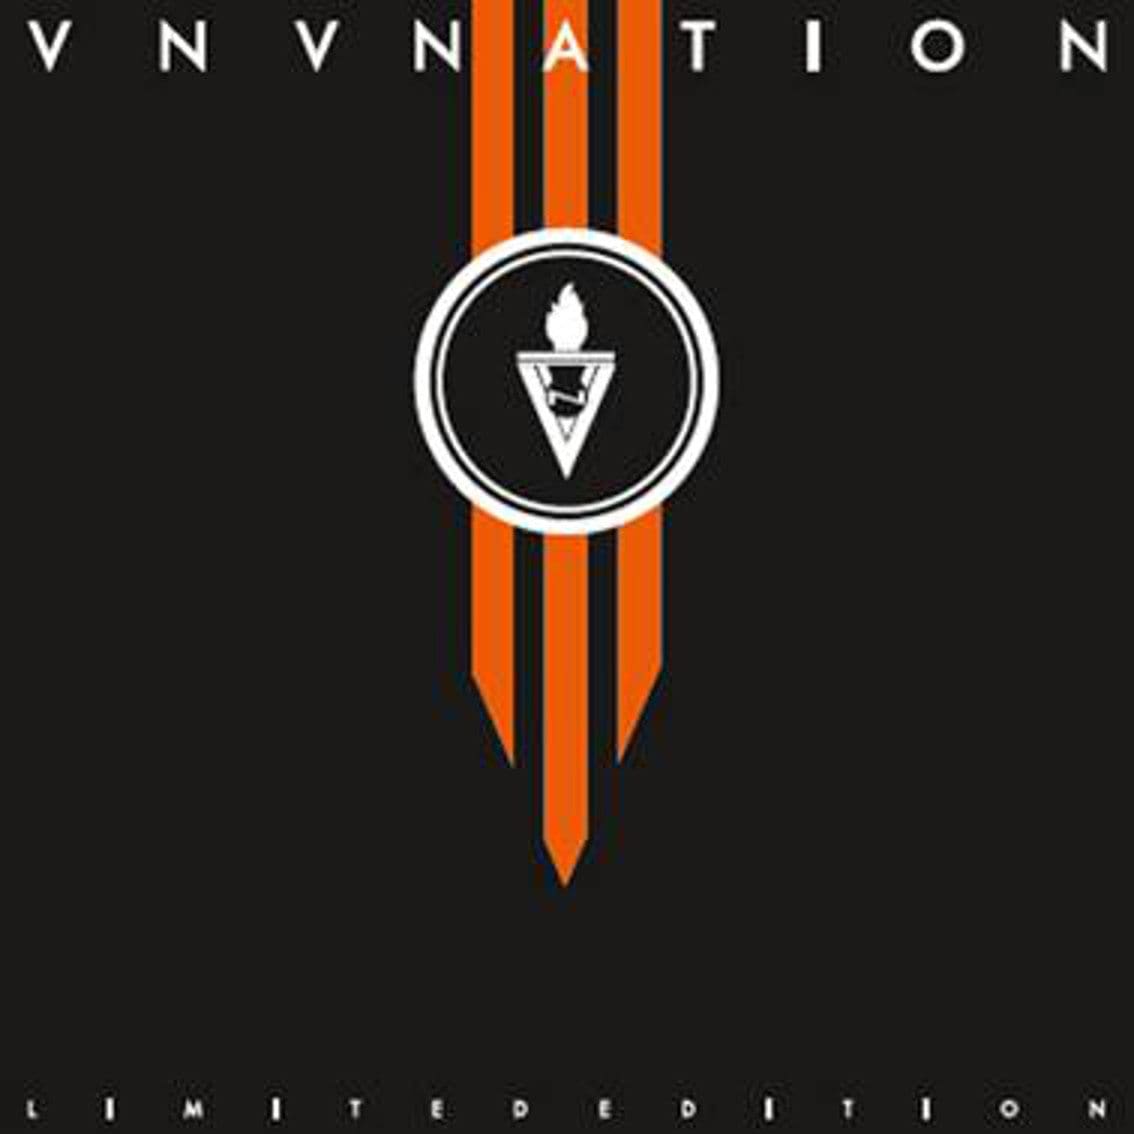 Rare VNV Nation transparent clear vinyl of 'Empires' available - 200 copies only